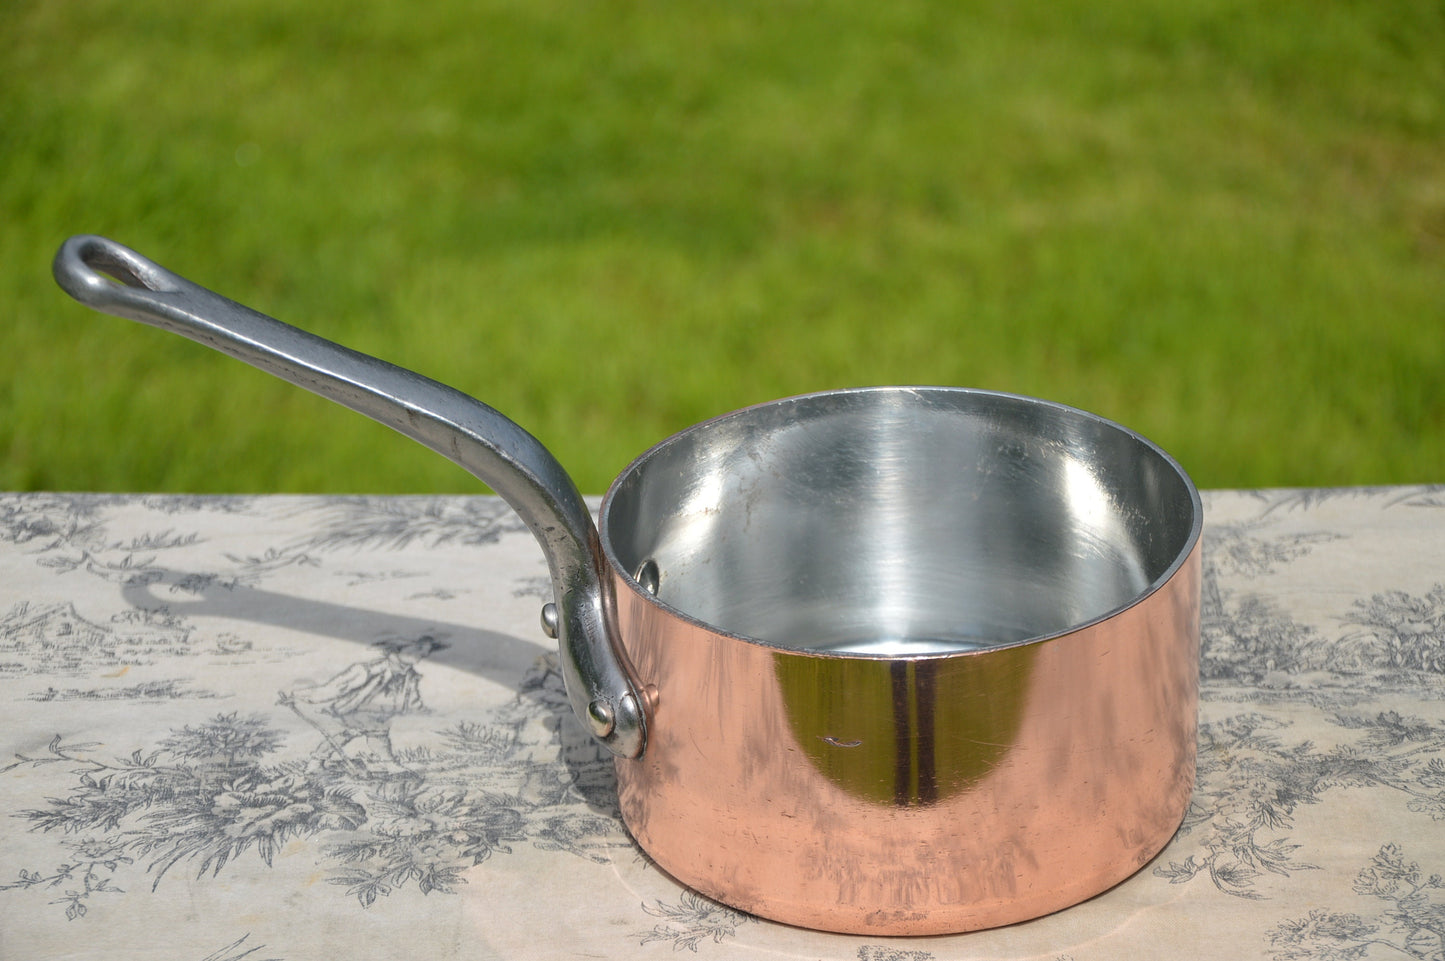 Vintage Chomette Favor Saucepan French Copper 16cm 6 1/4 inch 2.8mm New Tin Lined Professional Sauce Pan Butter Pan 1.8 k Cast Iron Handle